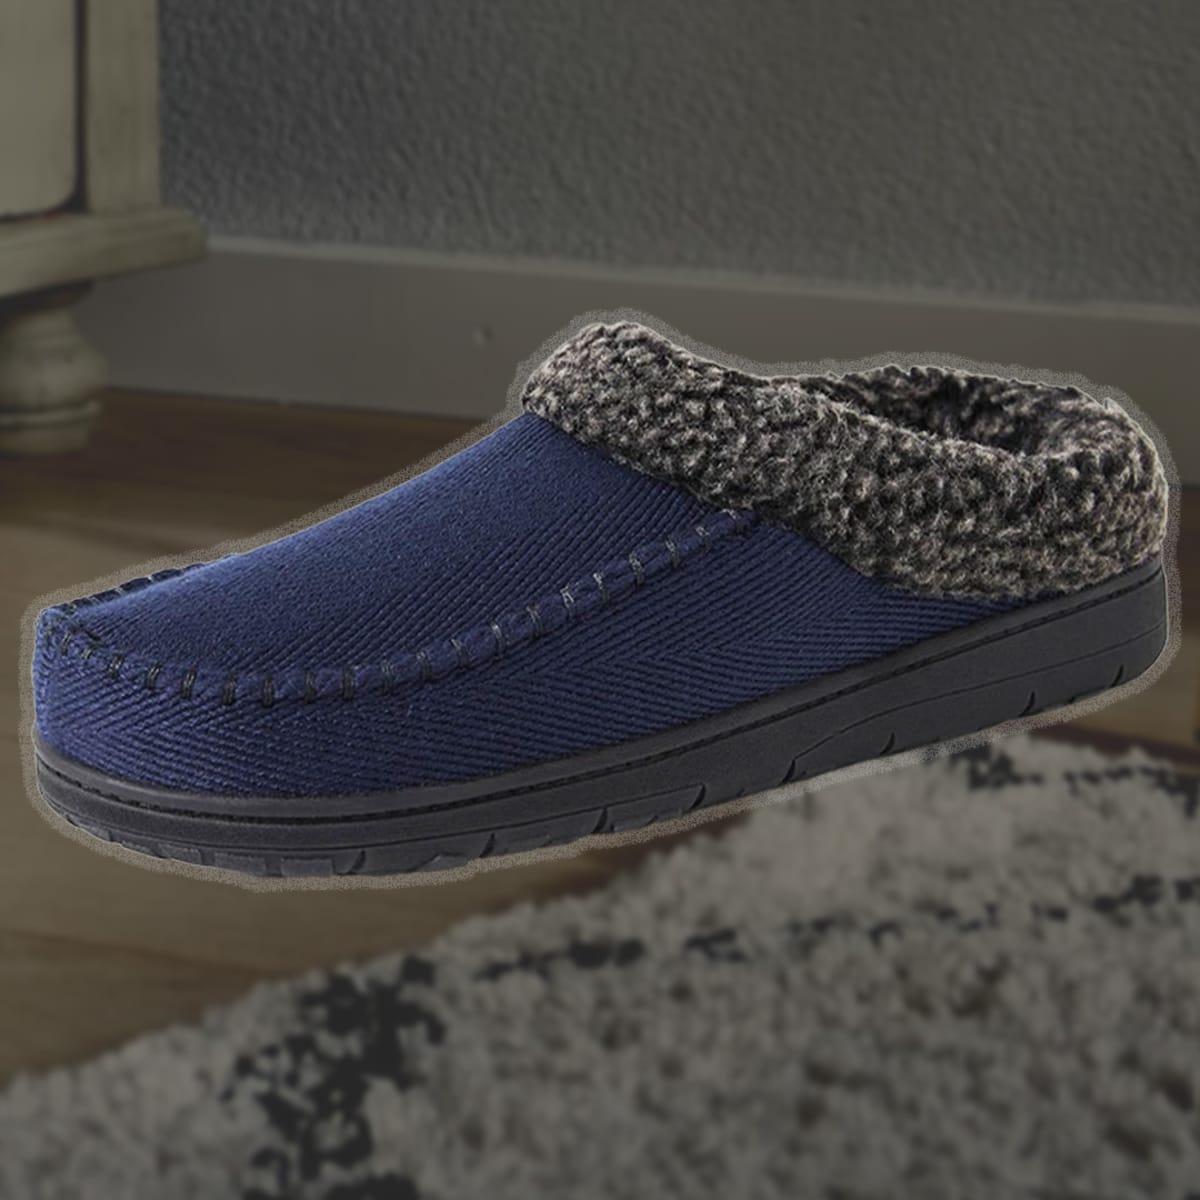 These fleece slippers are perfect for fall — and just $22